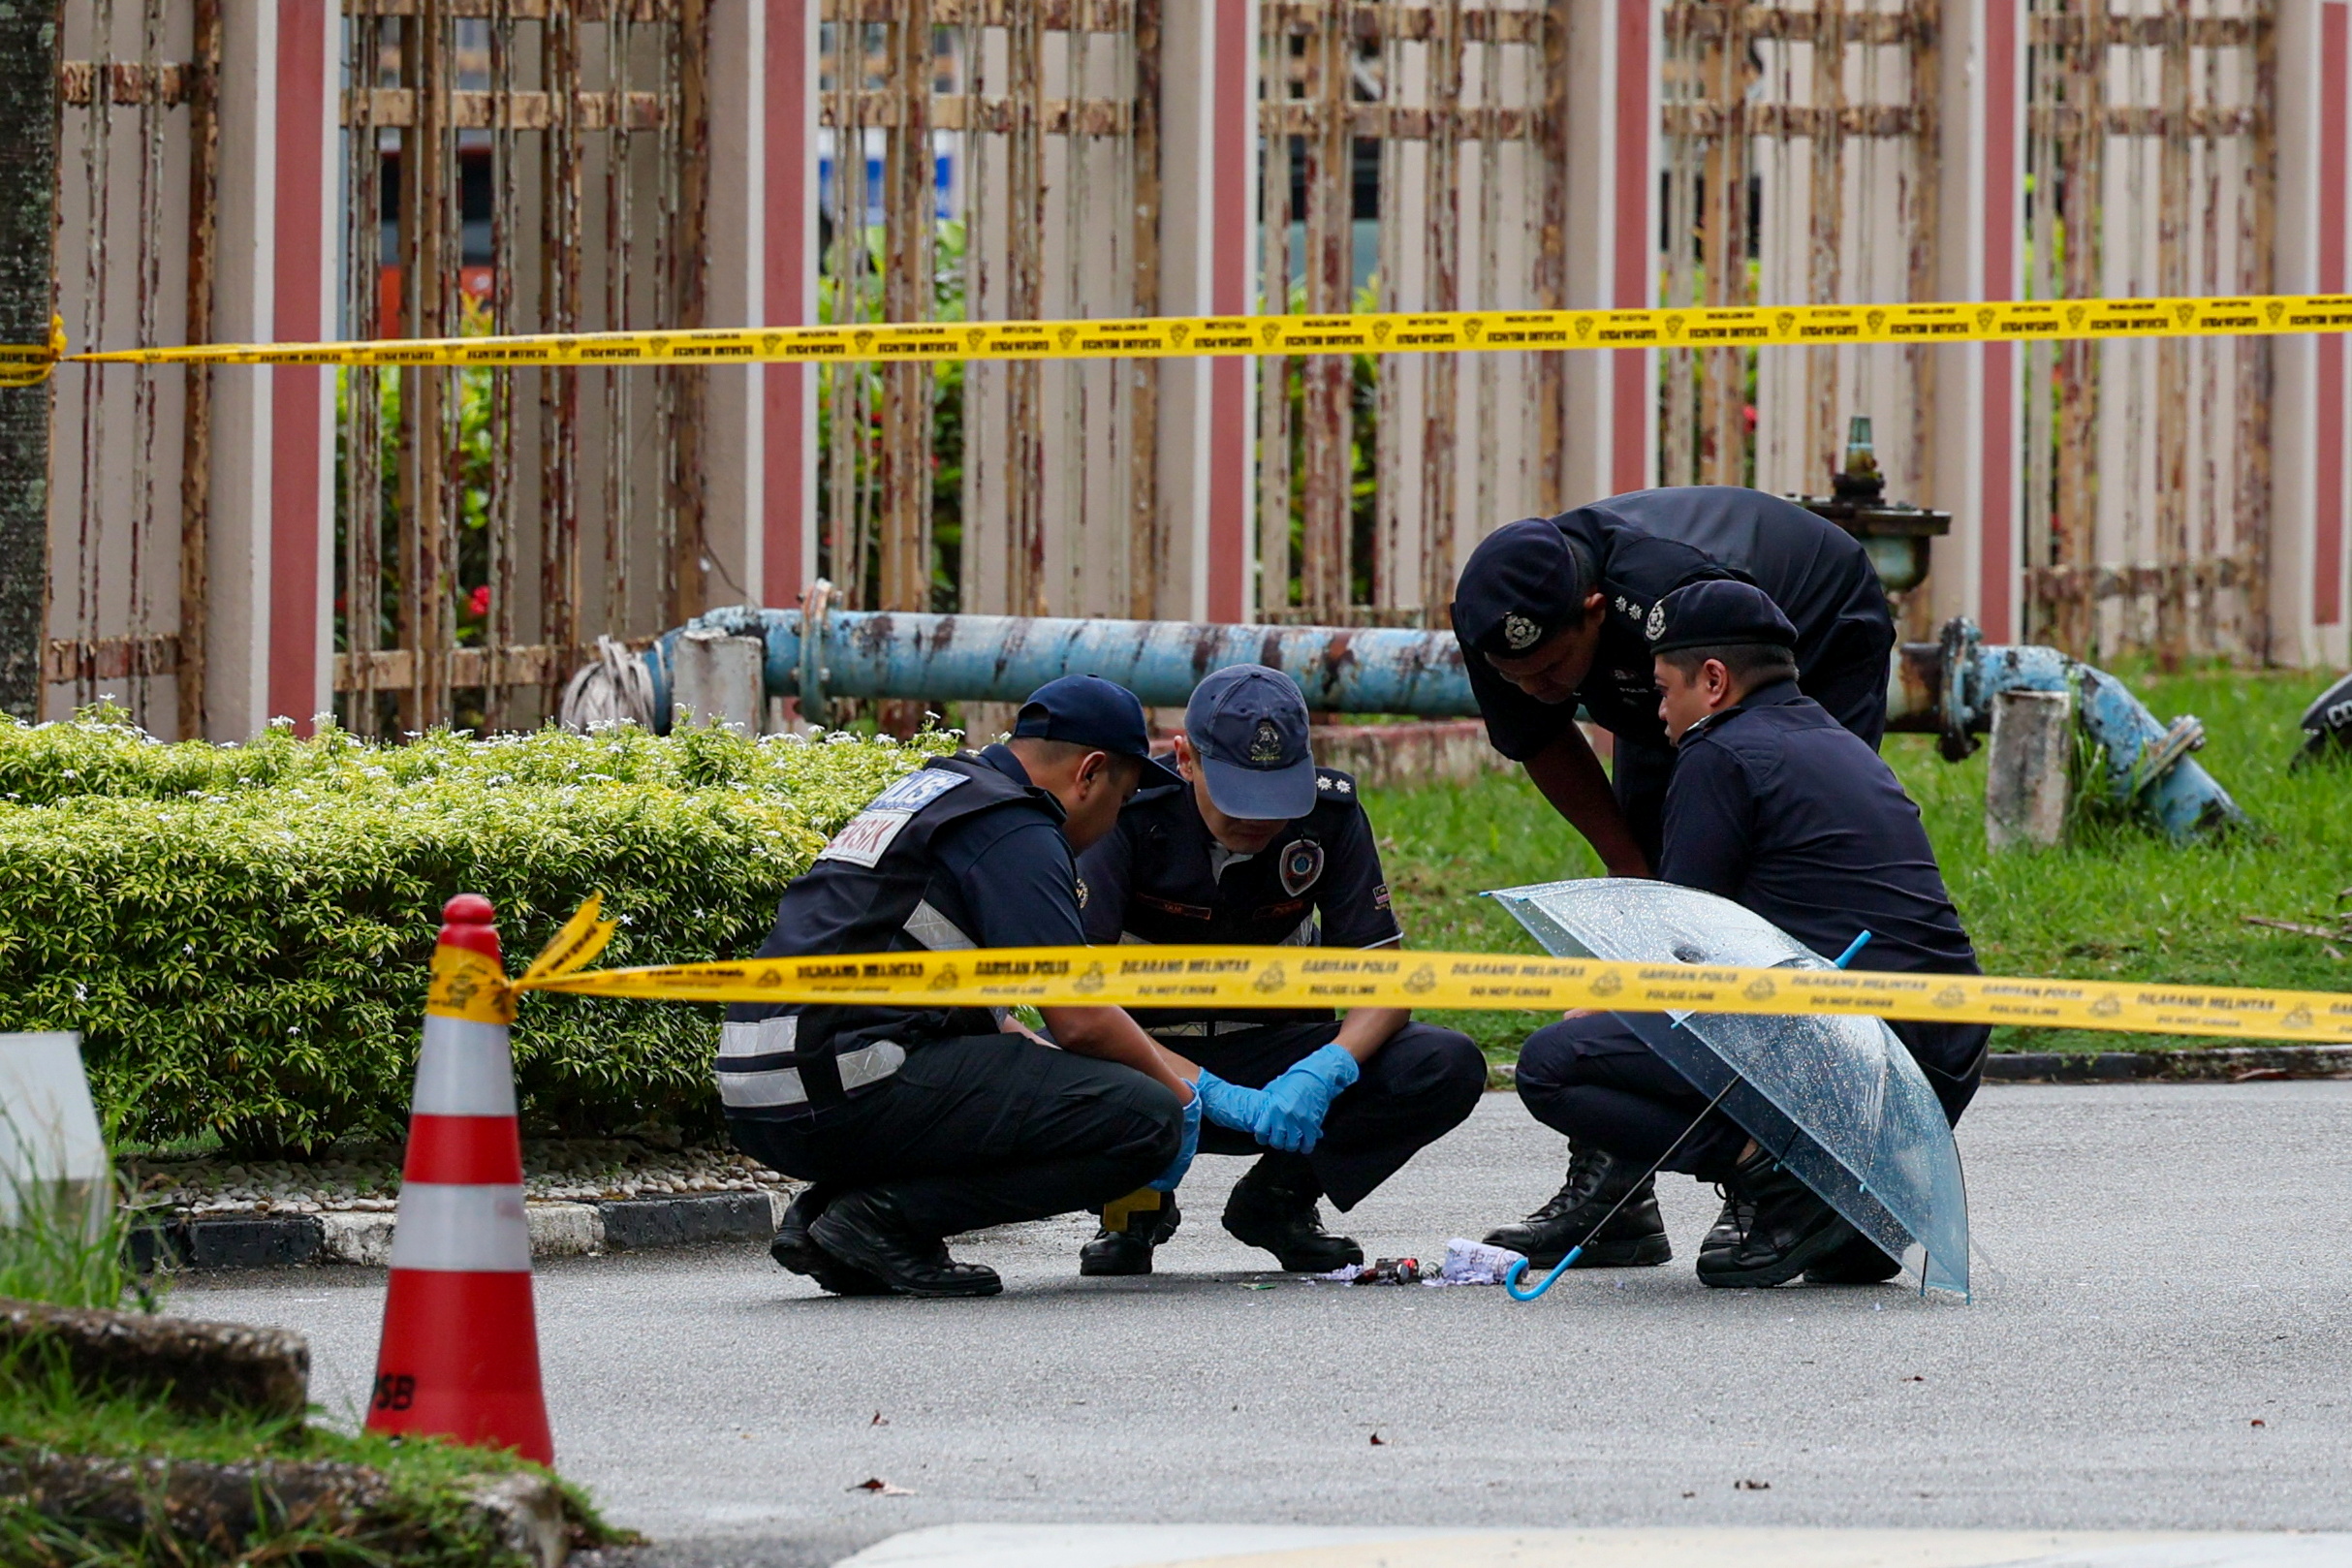 Terengganu court complex receives bomb scare, forcing staff evacuation